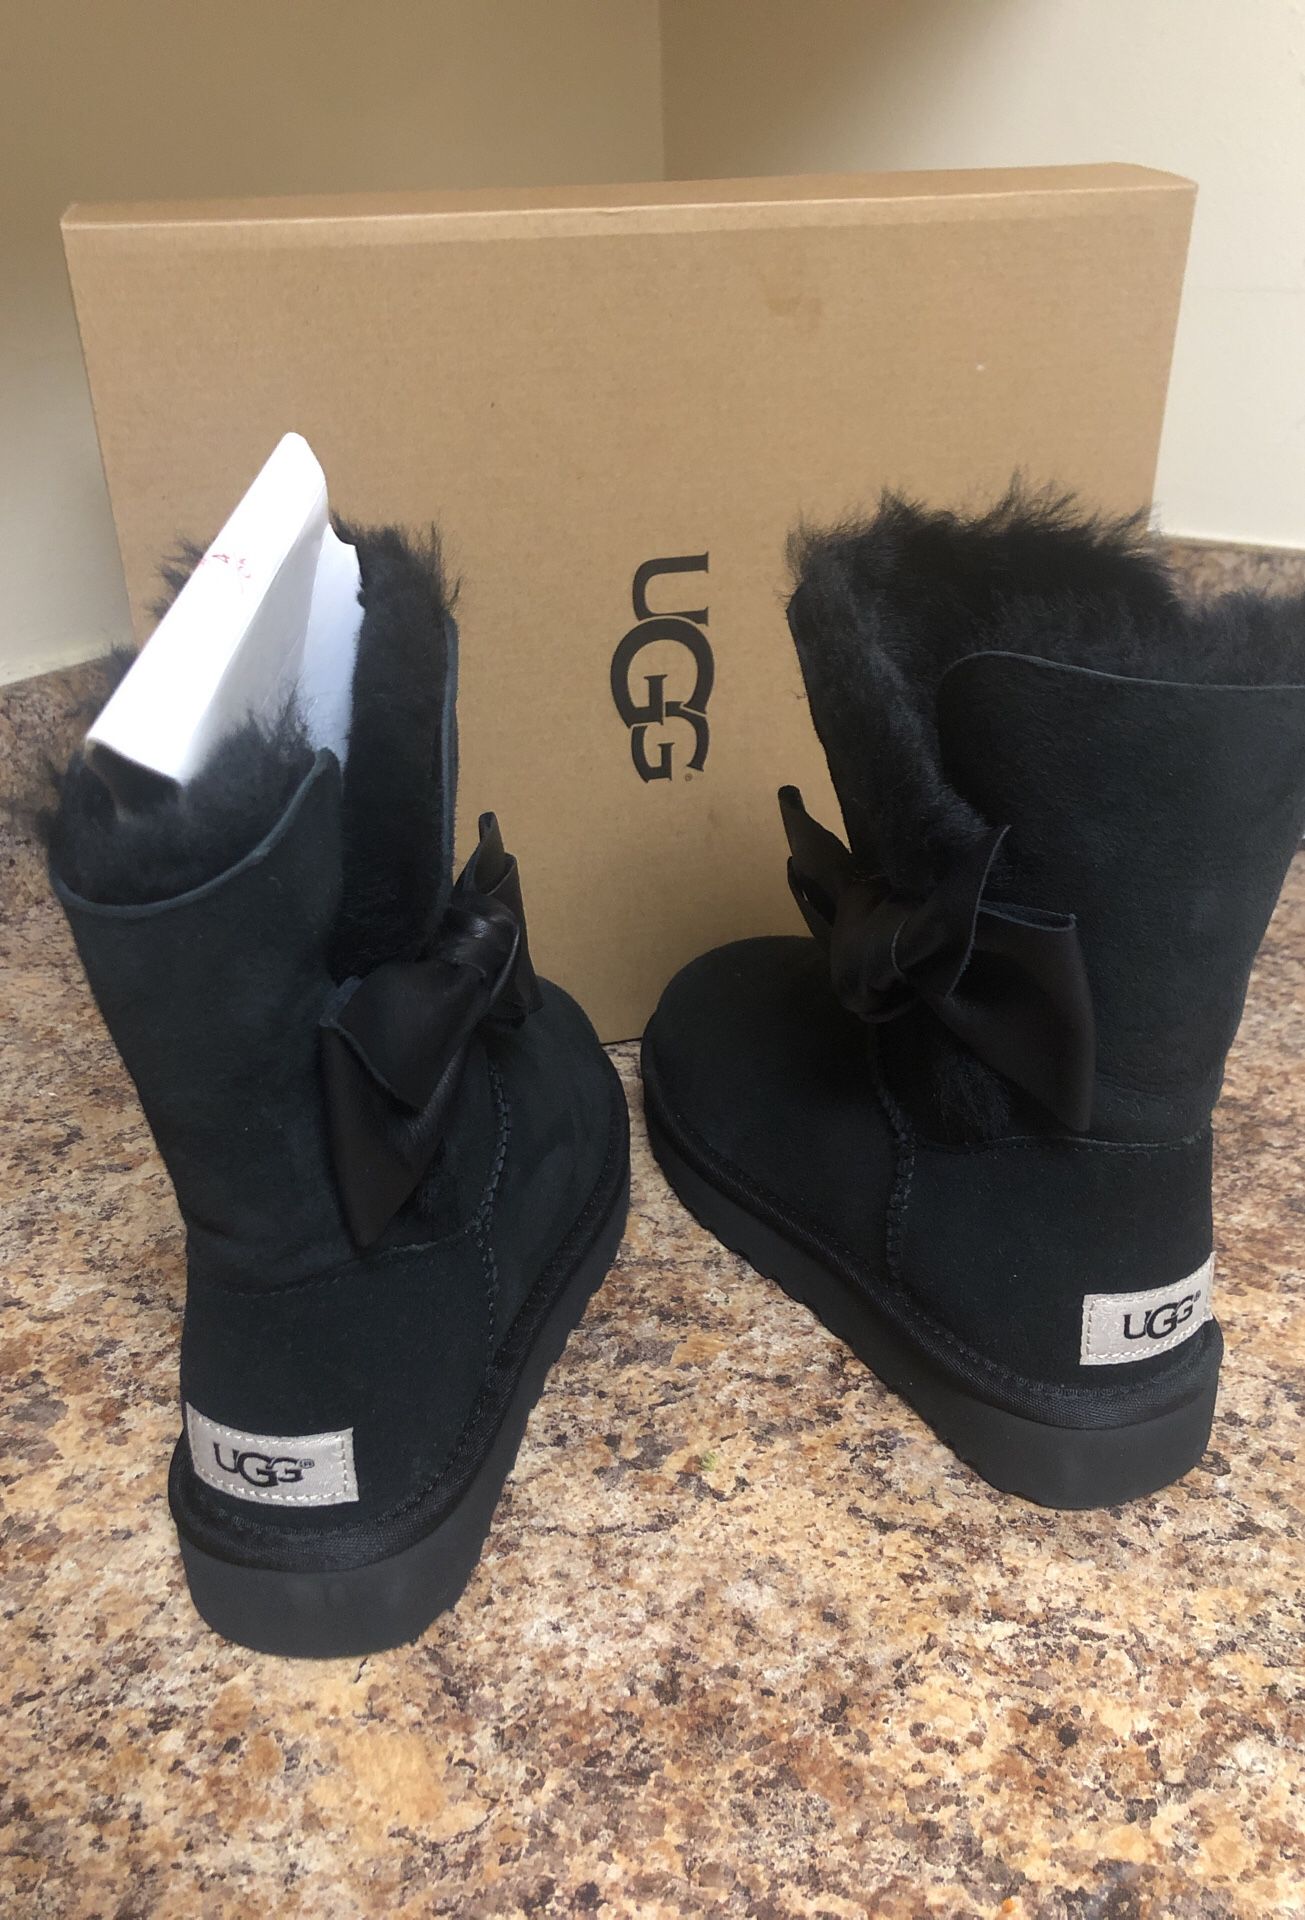 Never worn Uggs size 5